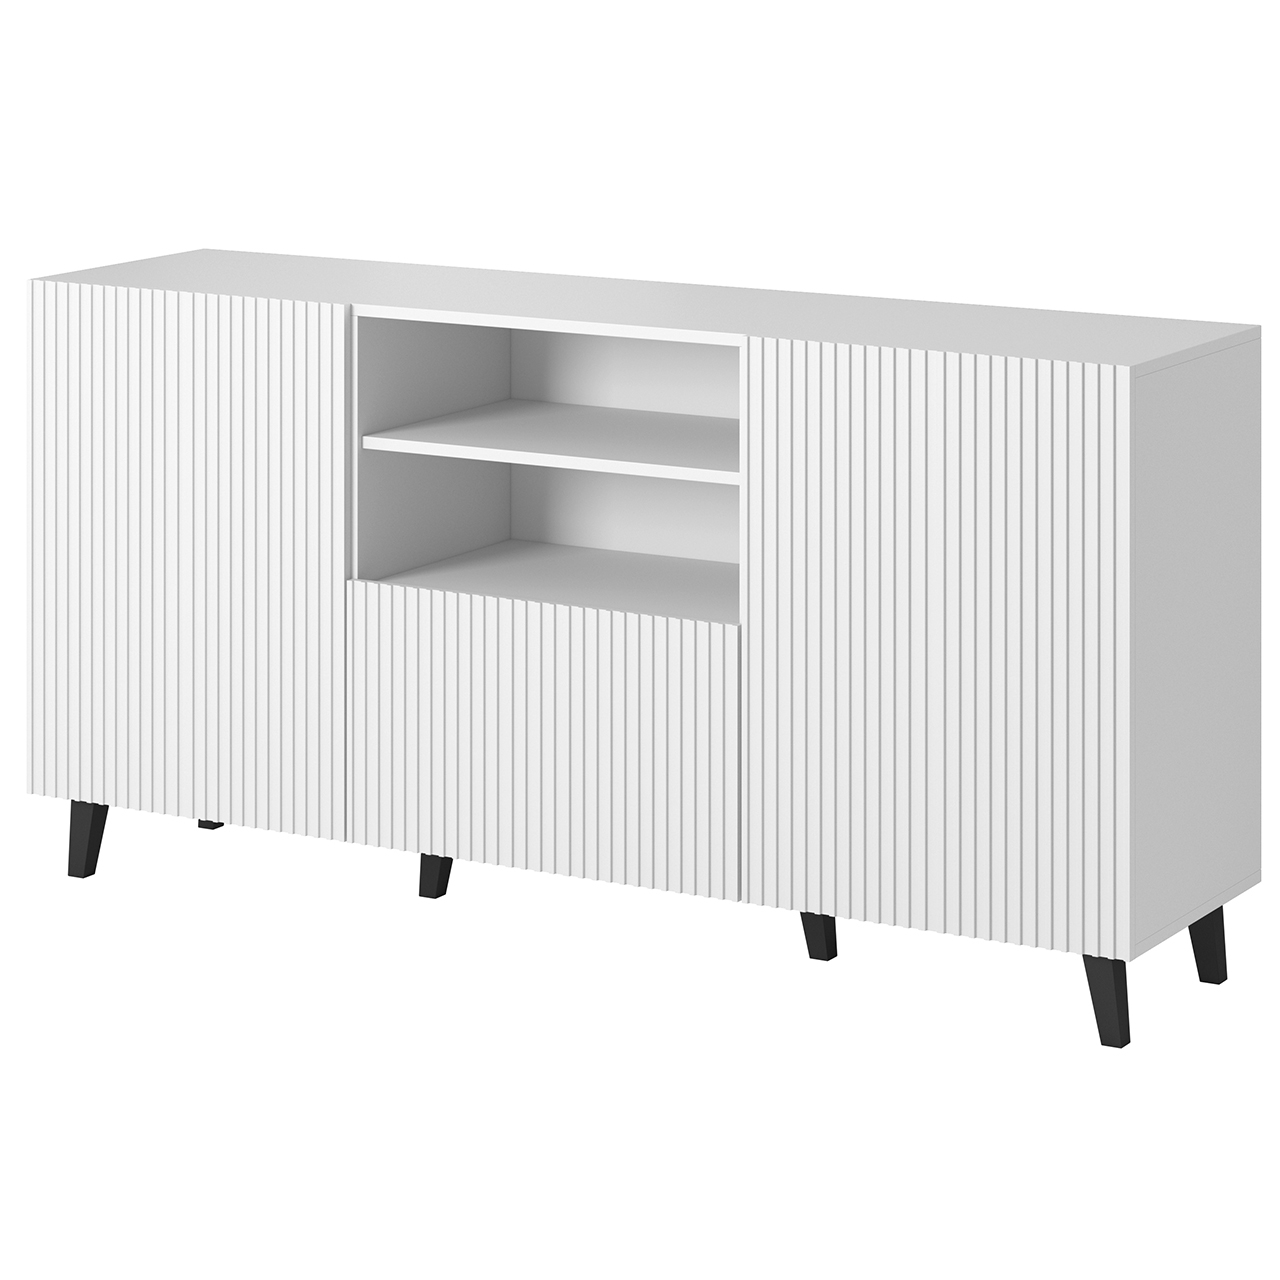 Storage cabinet PAFOS 150 white